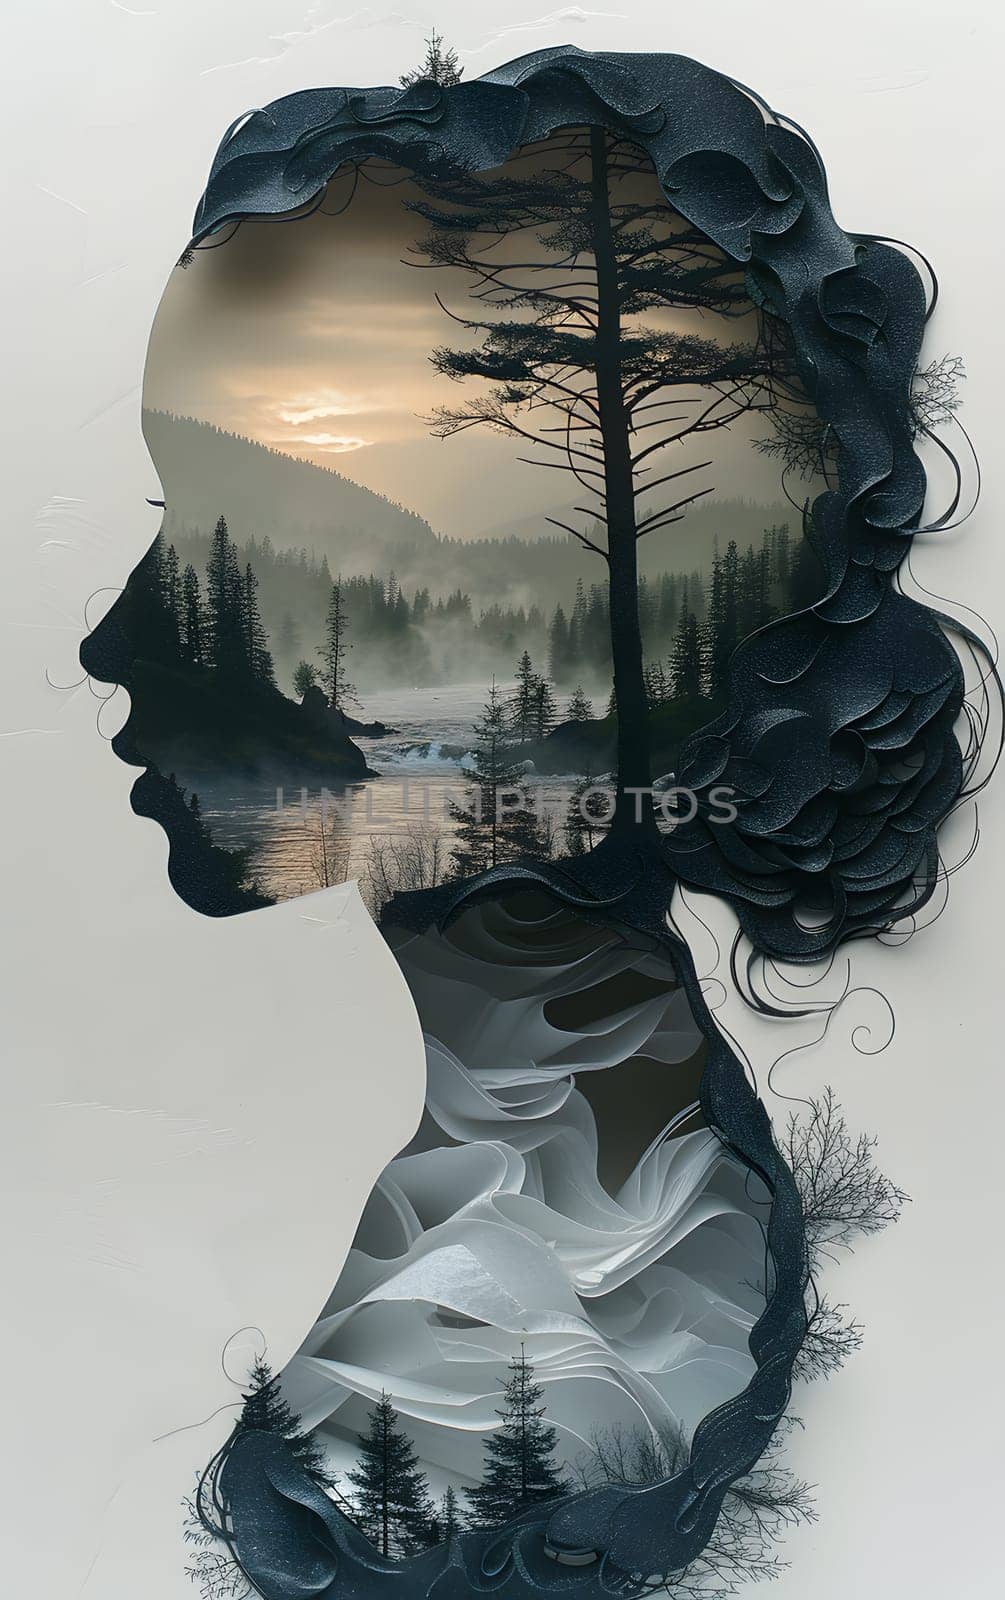 A mysterious piece of art featuring a womans jawline merging with the forest, capturing a surreal blend of beauty and nature